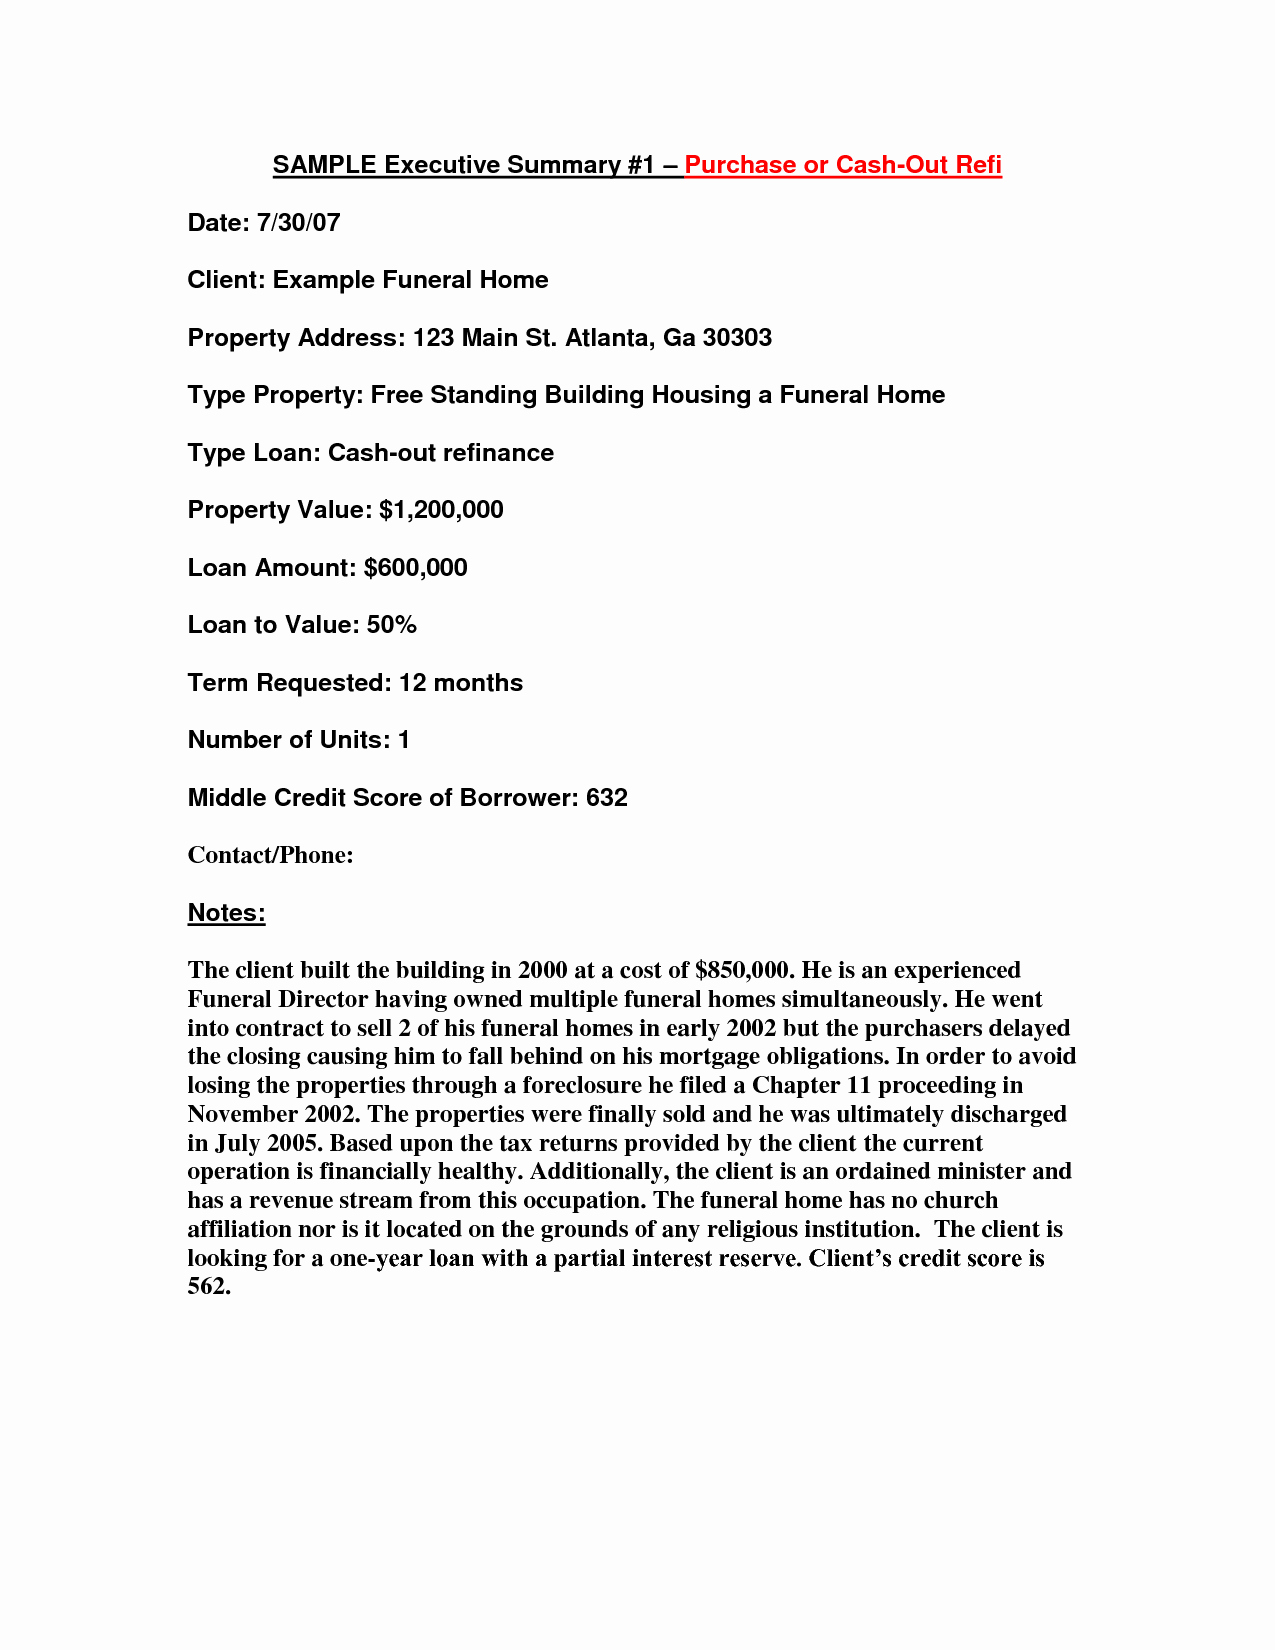 Sample Letter Of Explanation for Cash Out Refinance Awesome 13 Best Of Writing Explanation Letter Sample